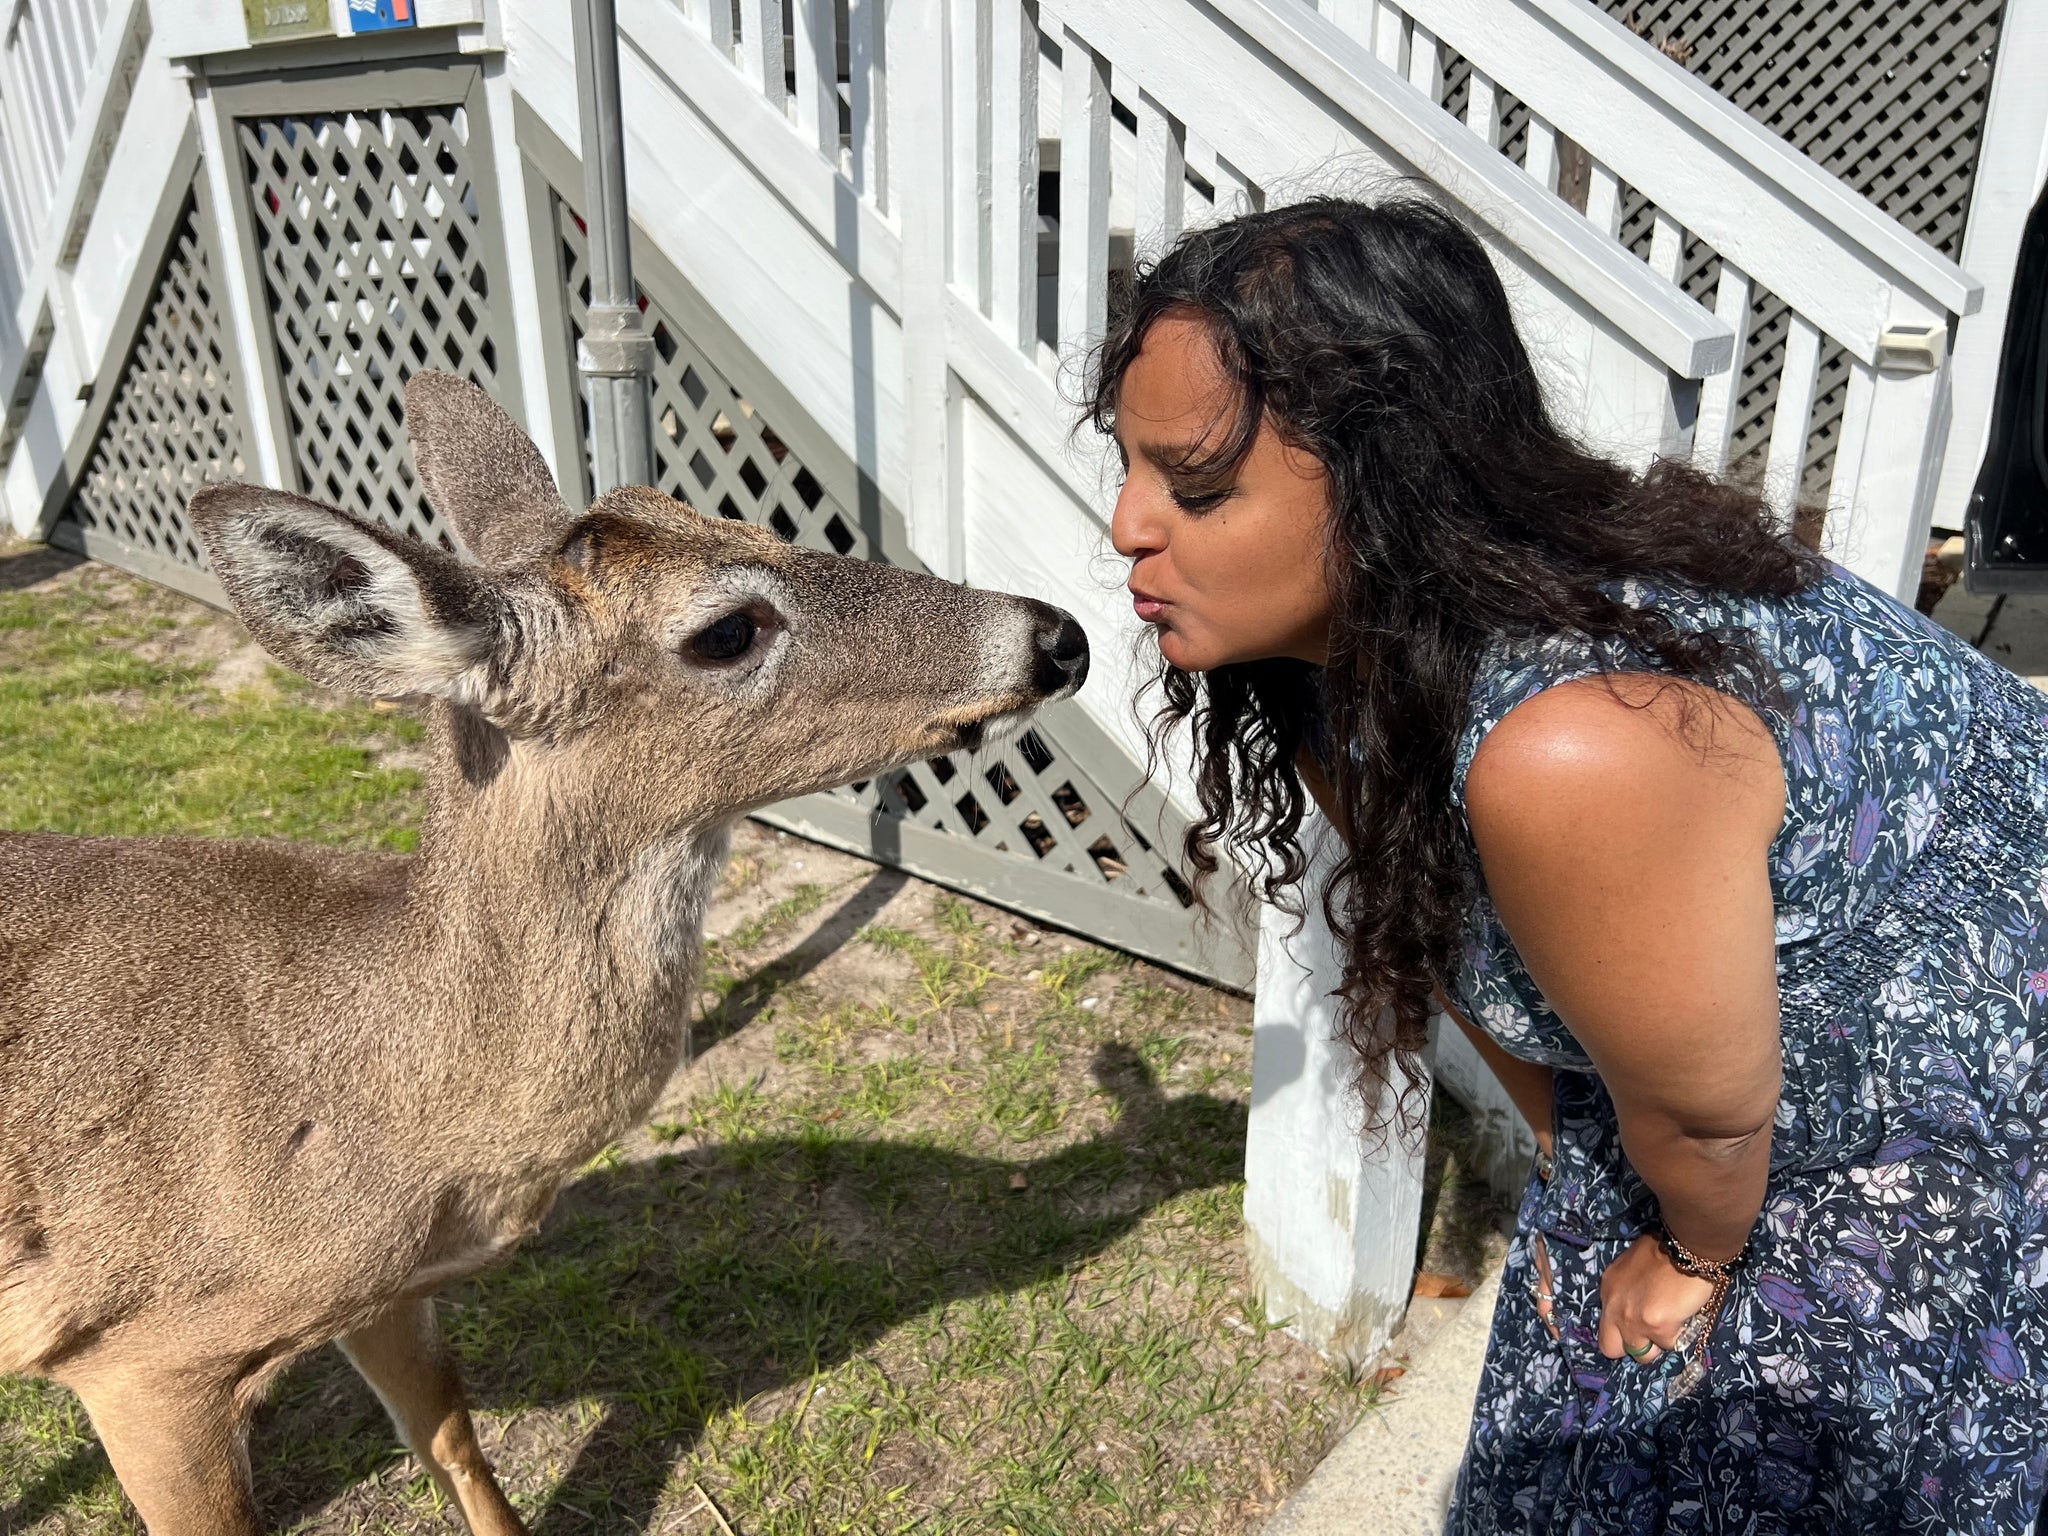 A Deer Kissed Me On the Lips!